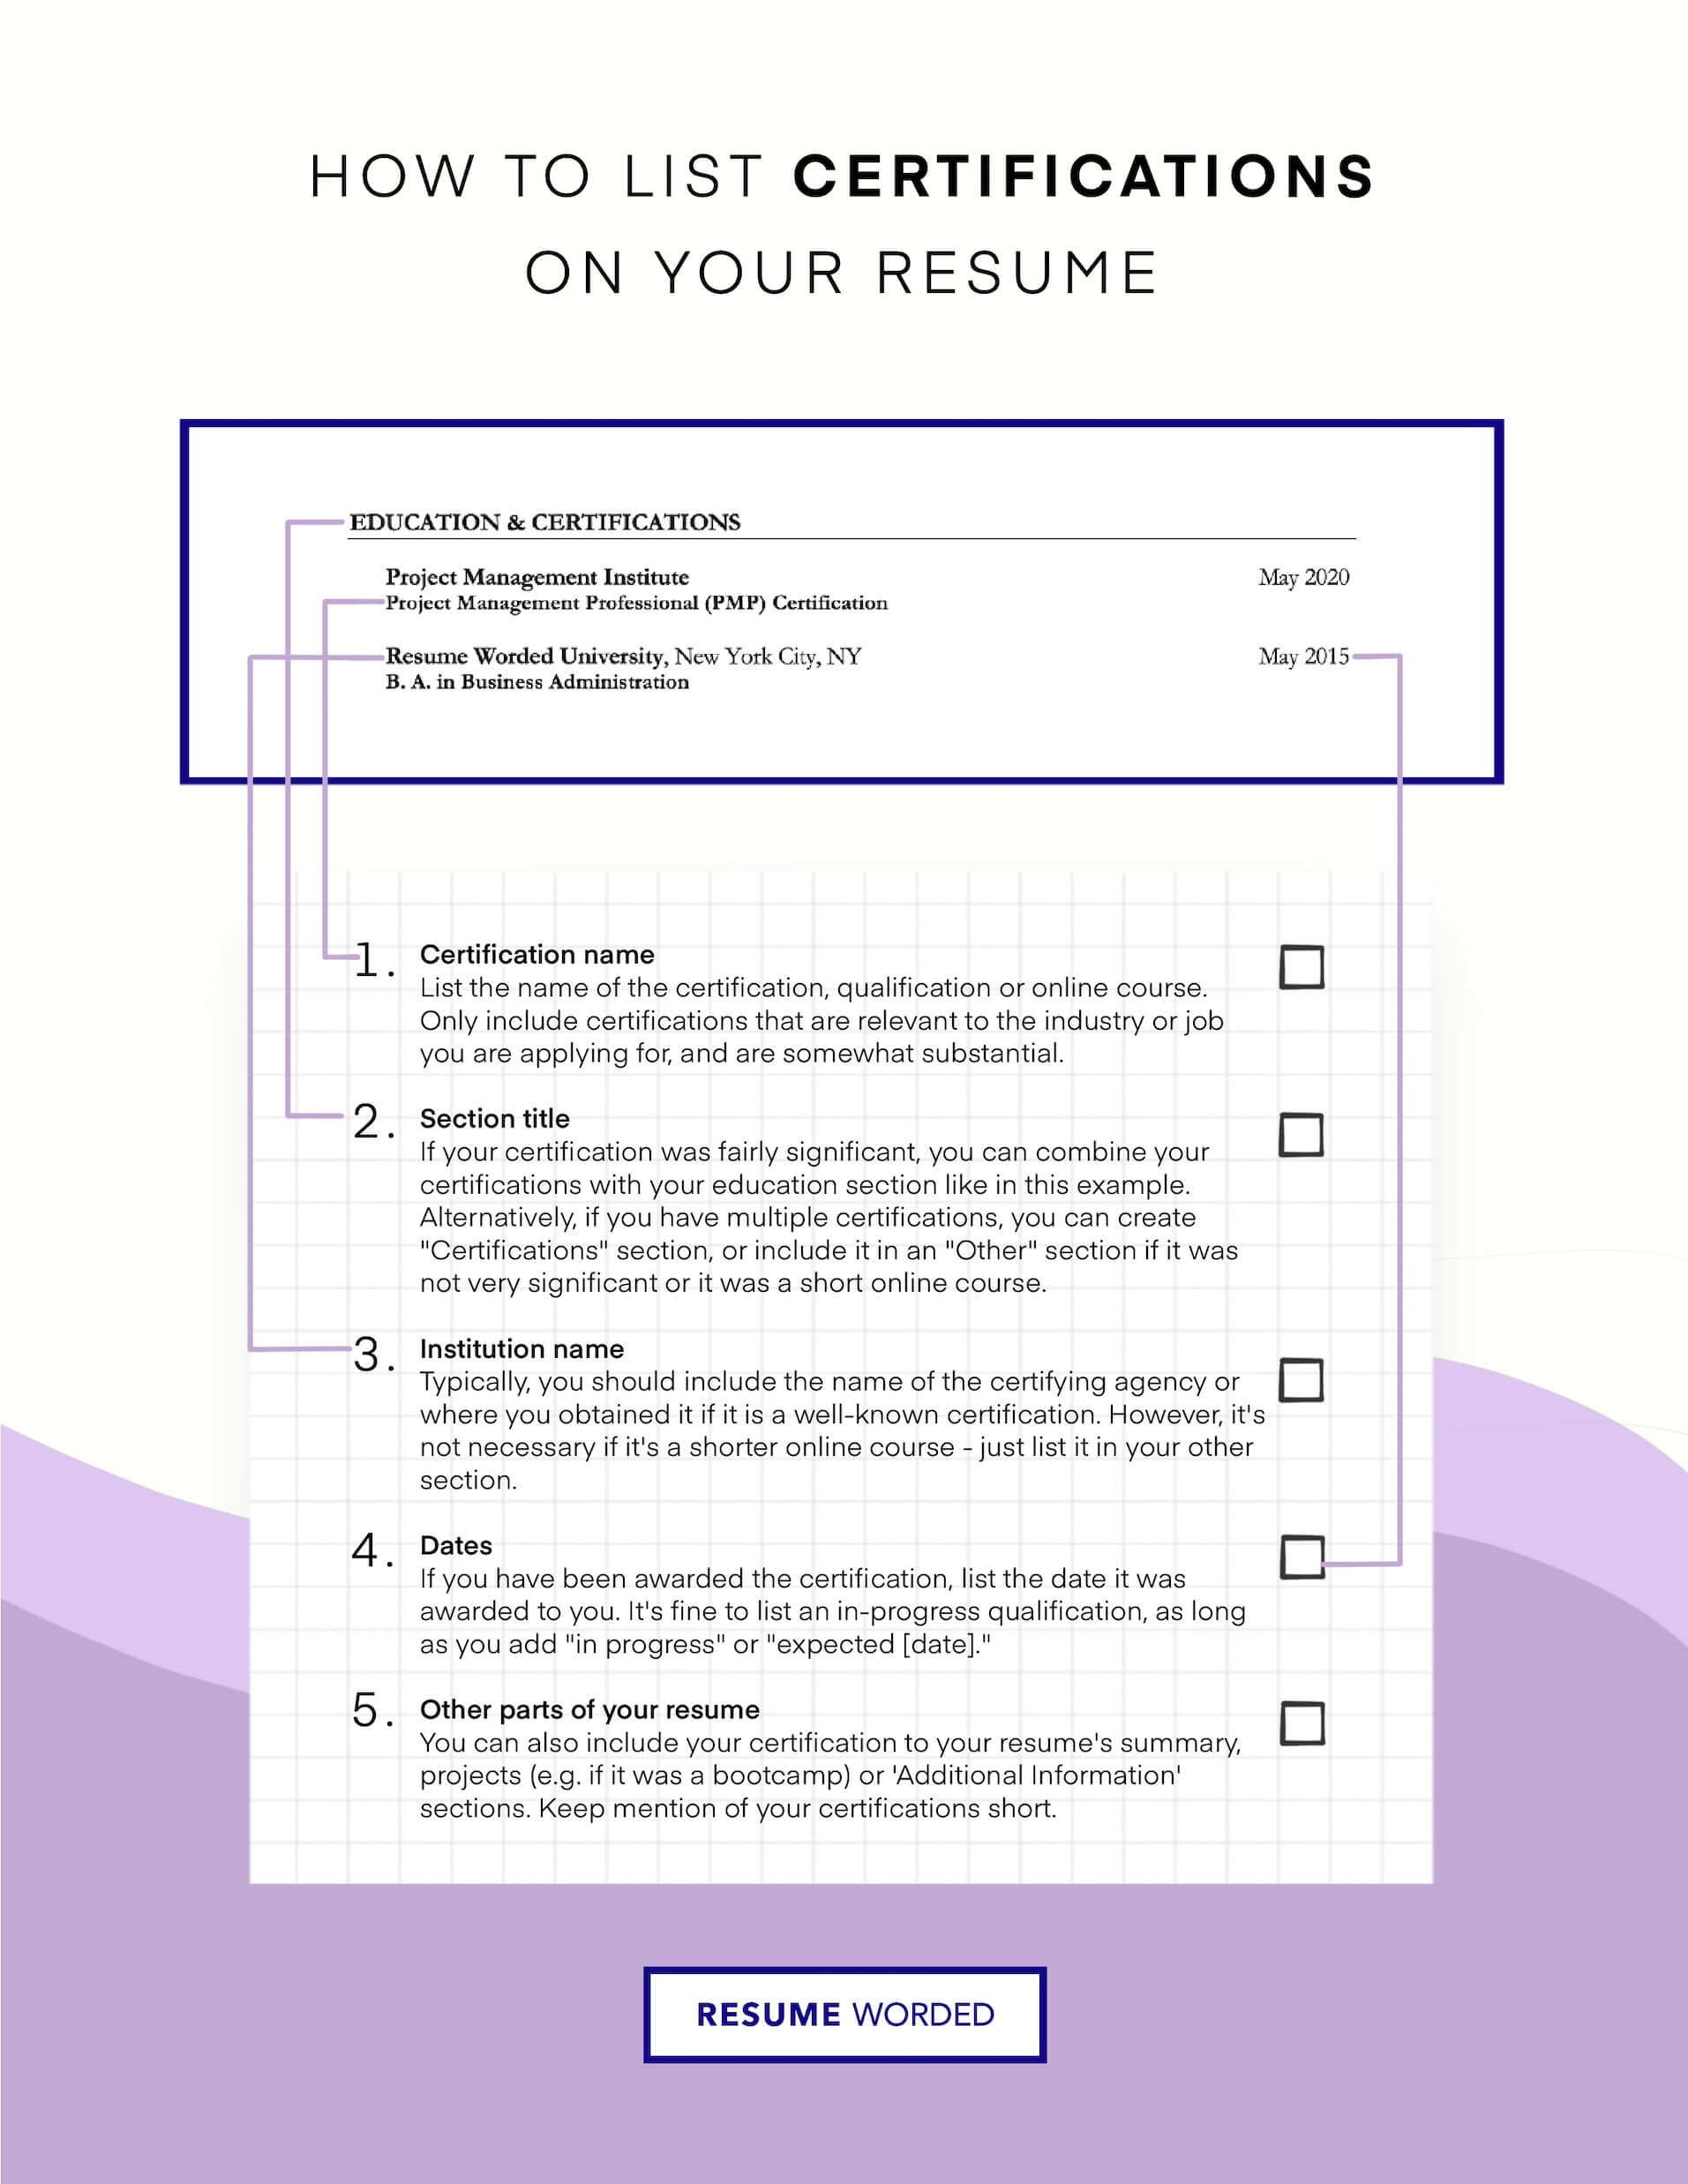 Include any certification in the IT field. - IT Product Manager Resume